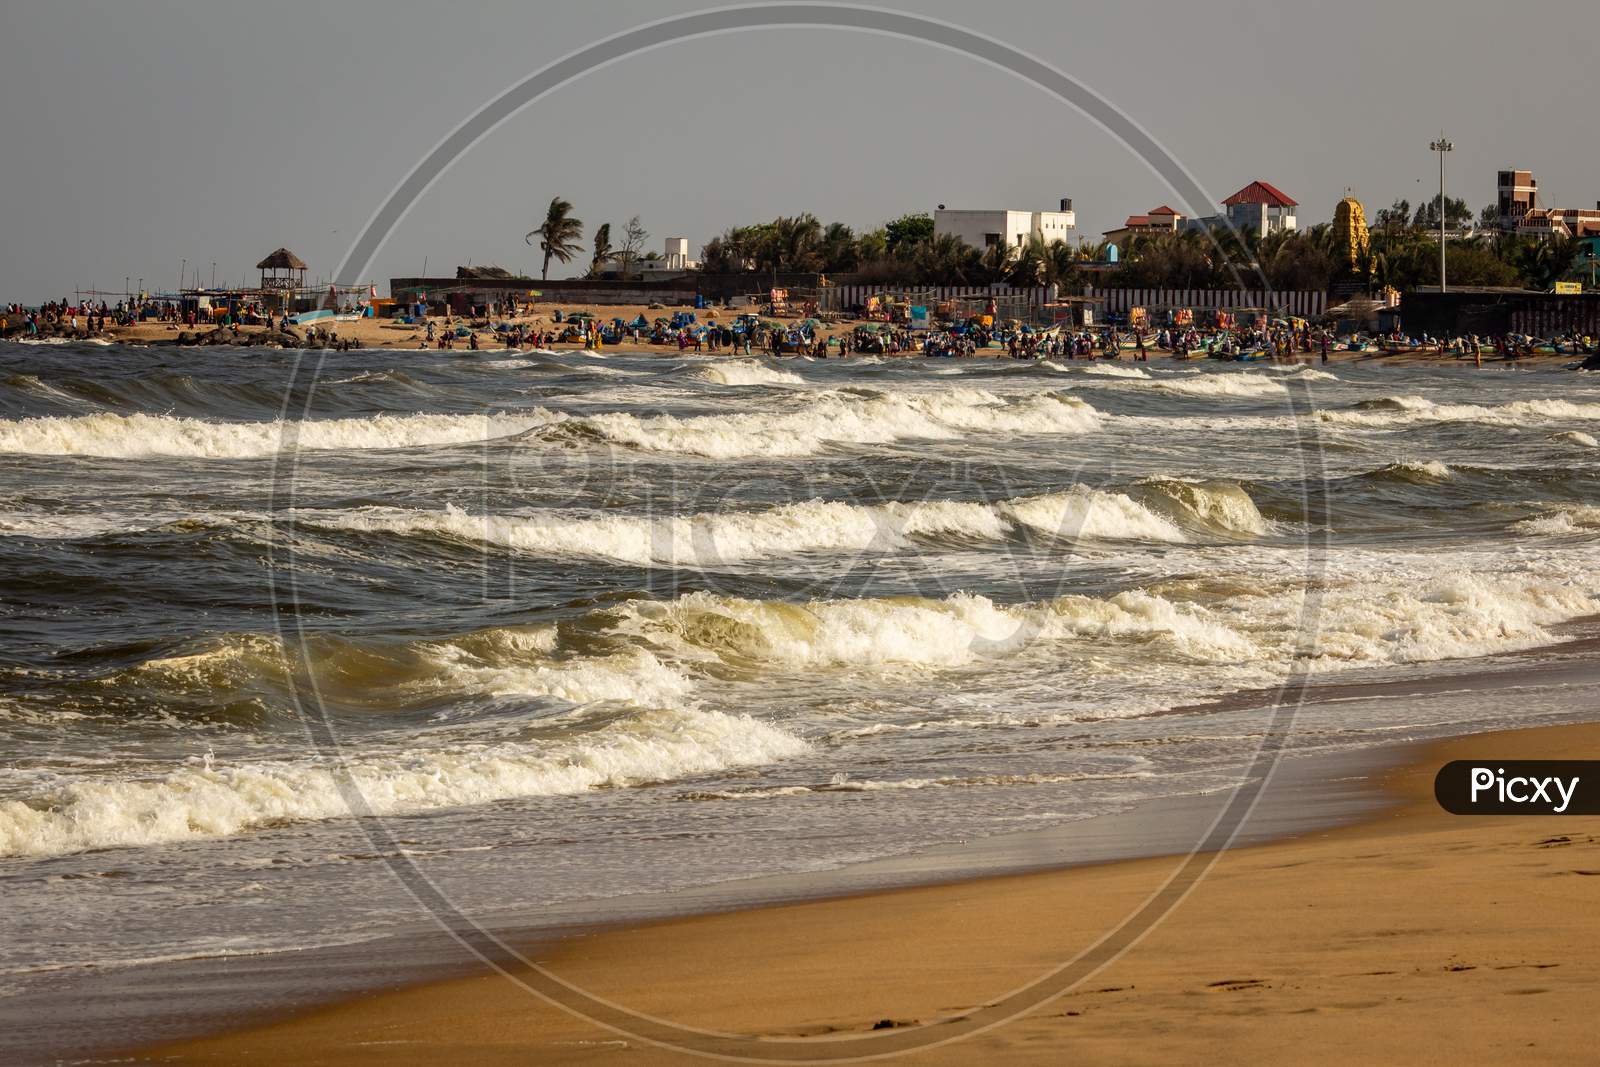 Kovalam, Tamil Nadu, India - February 04 2021: Scenic View Of The Waves And People Having Fun Along The Kovalam Beach, Chennai, India.